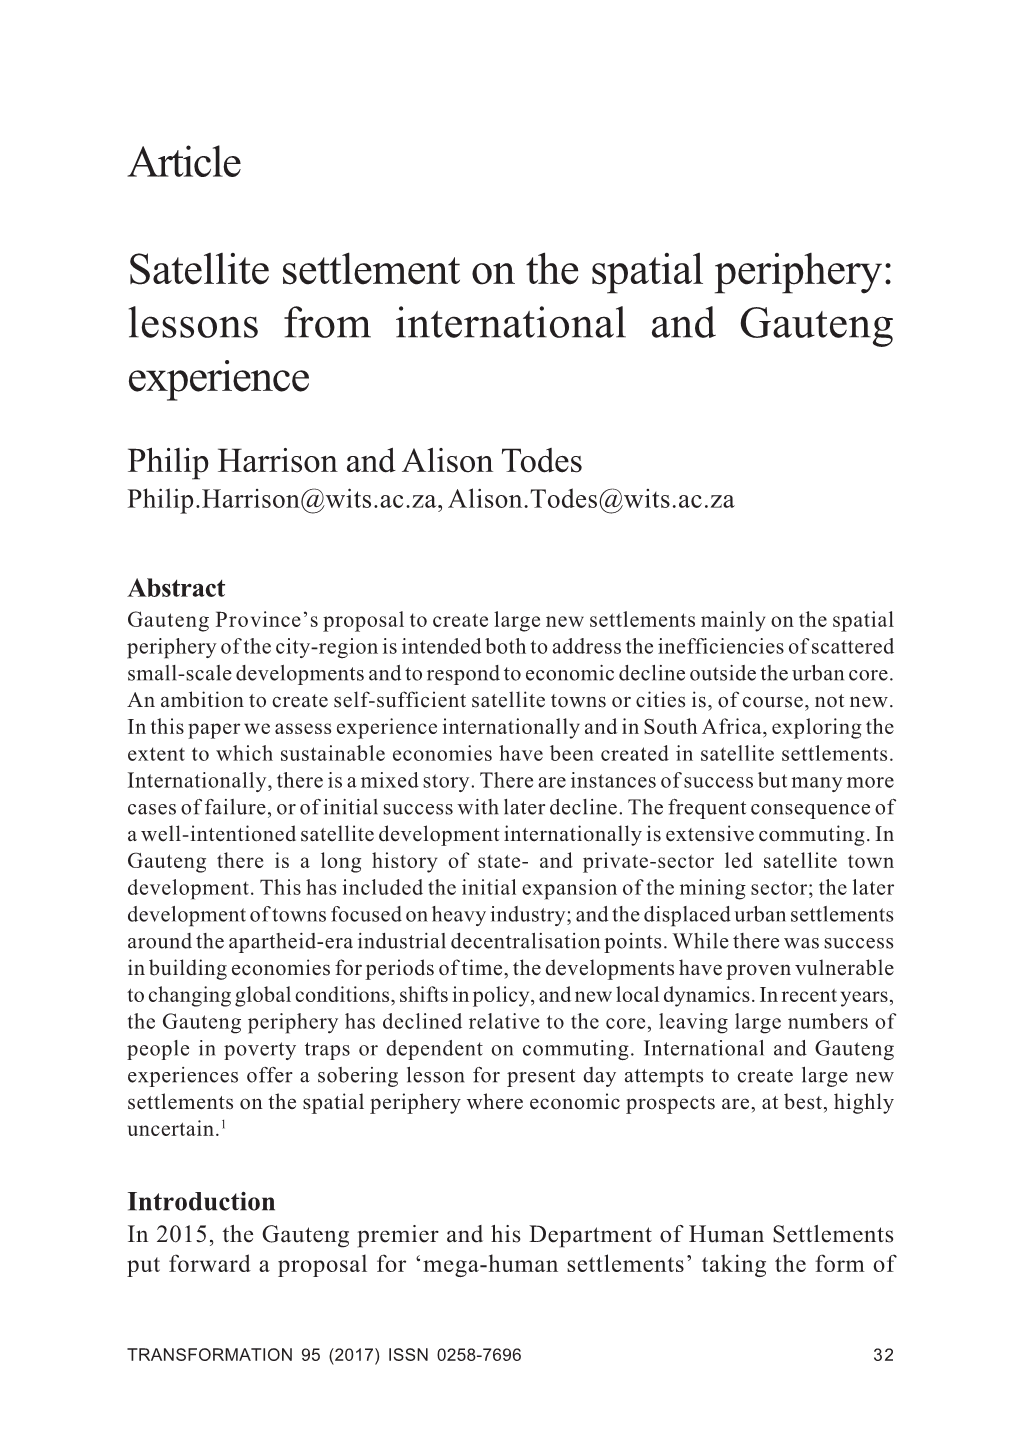 Article Satellite Settlement on the Spatial Periphery